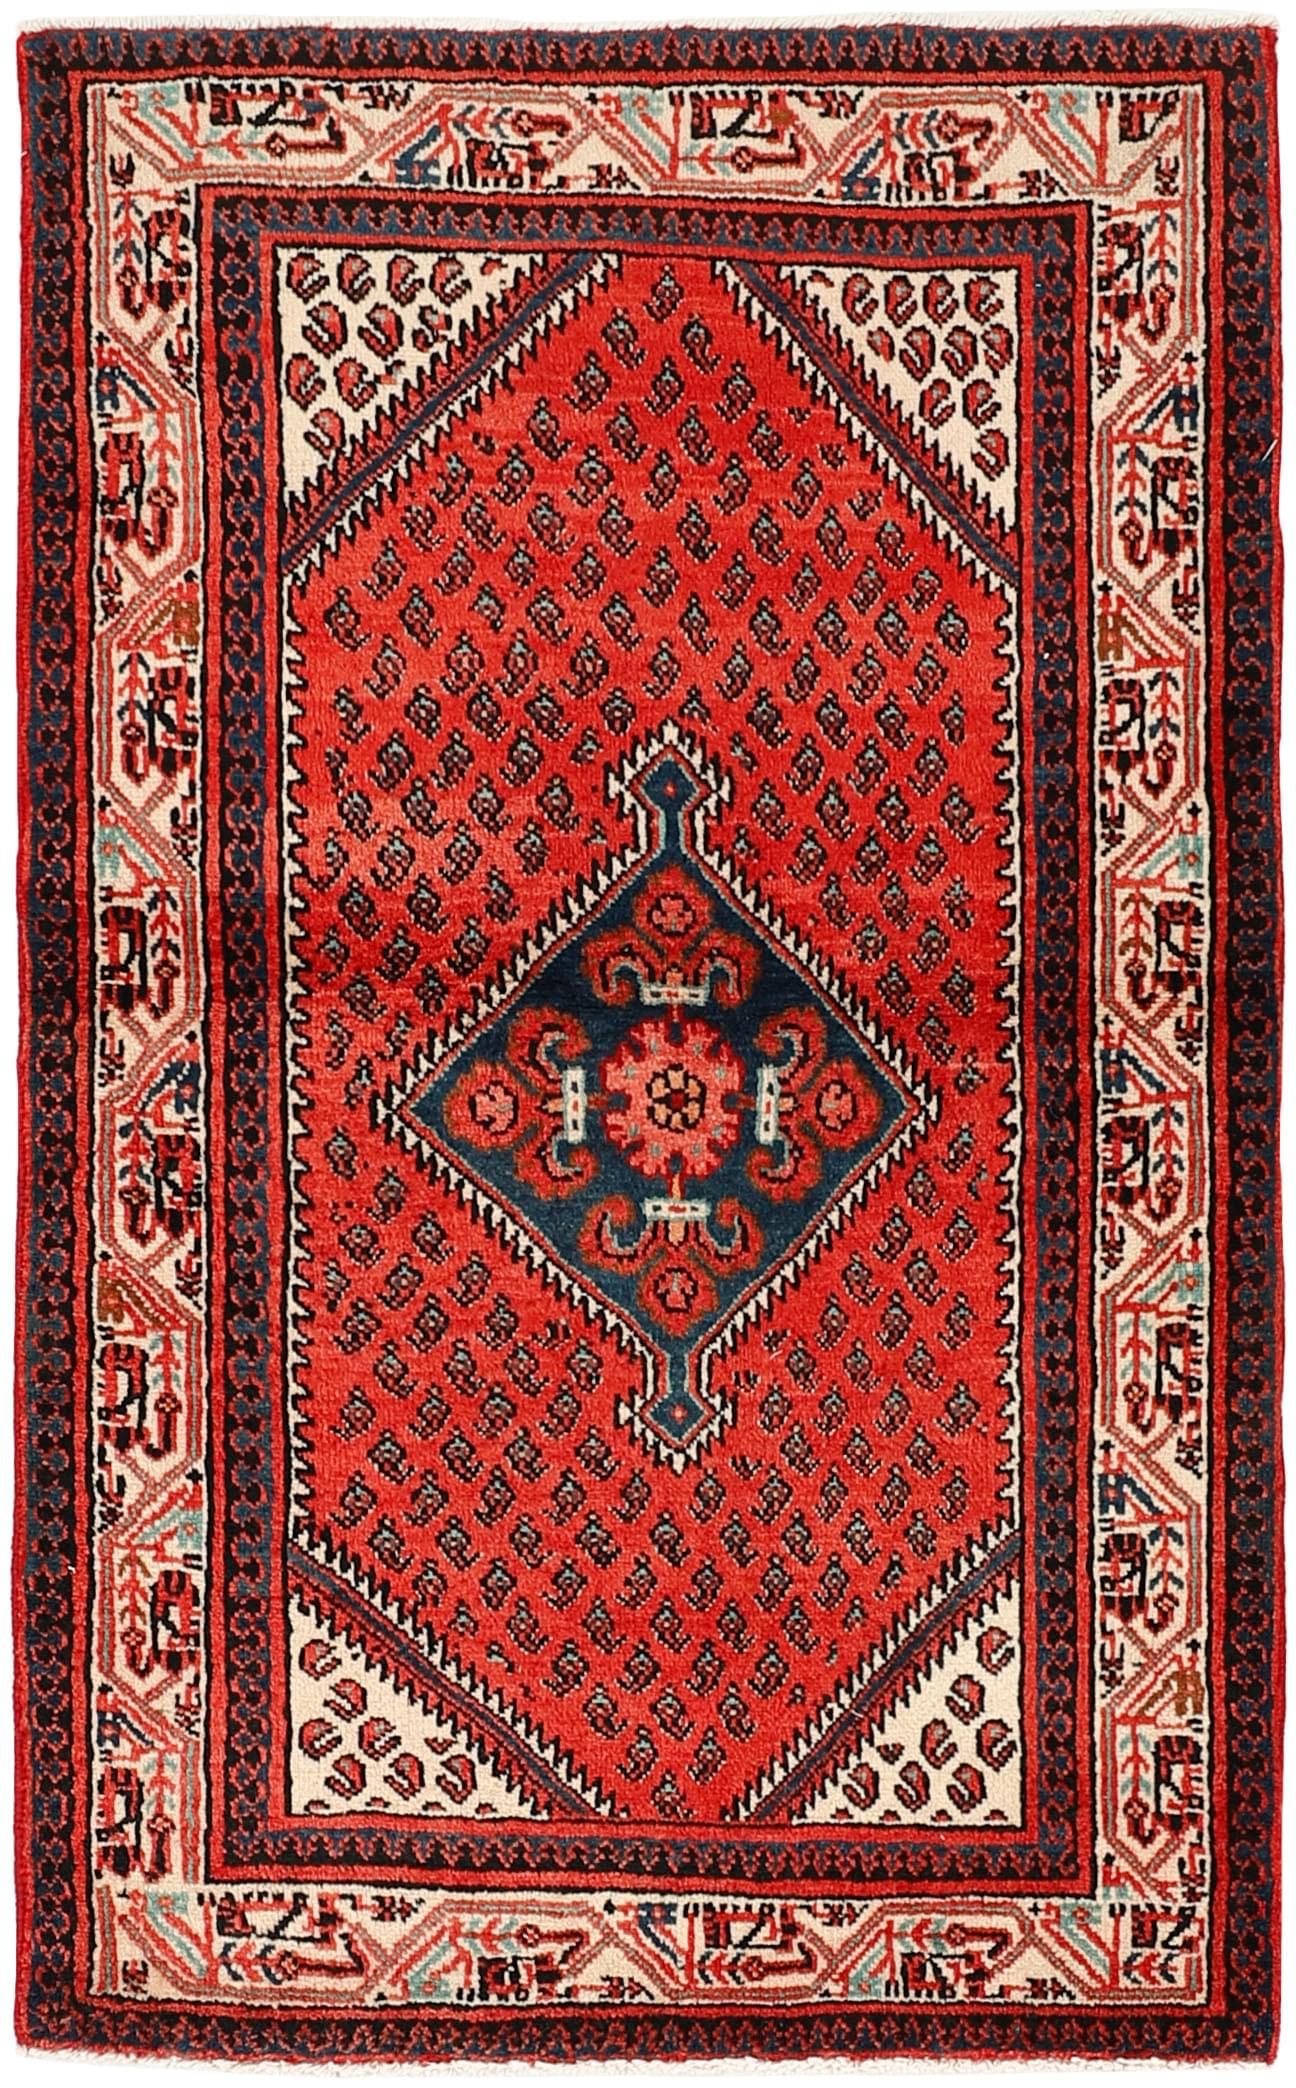 authentic persian rug with all-over traditional design in red, beige and blue